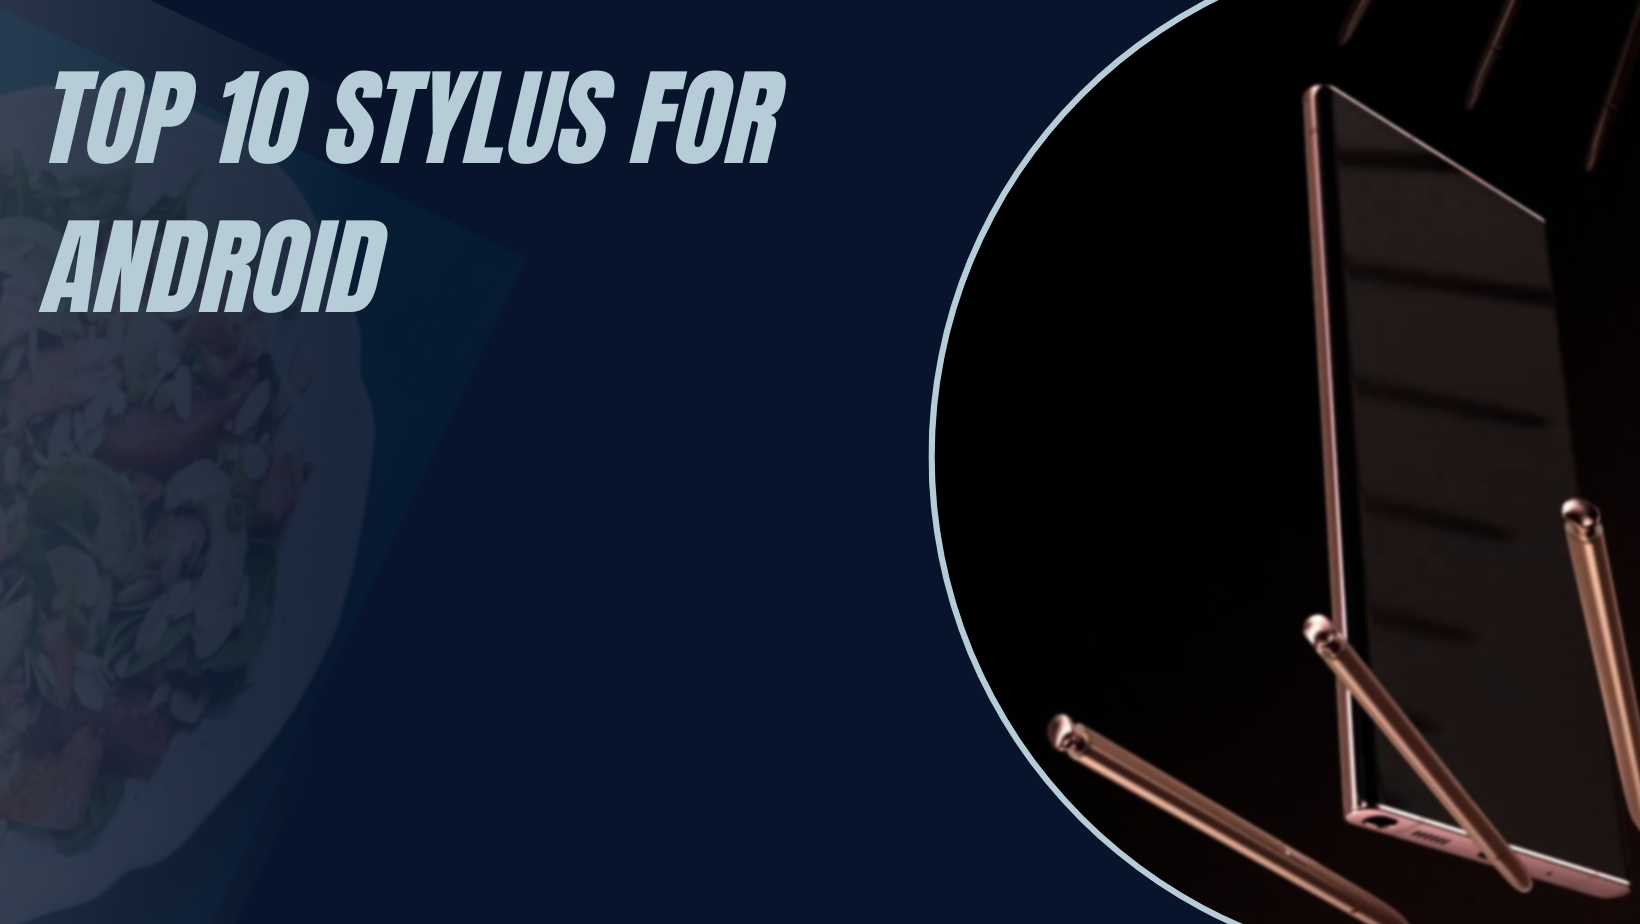 Top 10 Stylus For Android